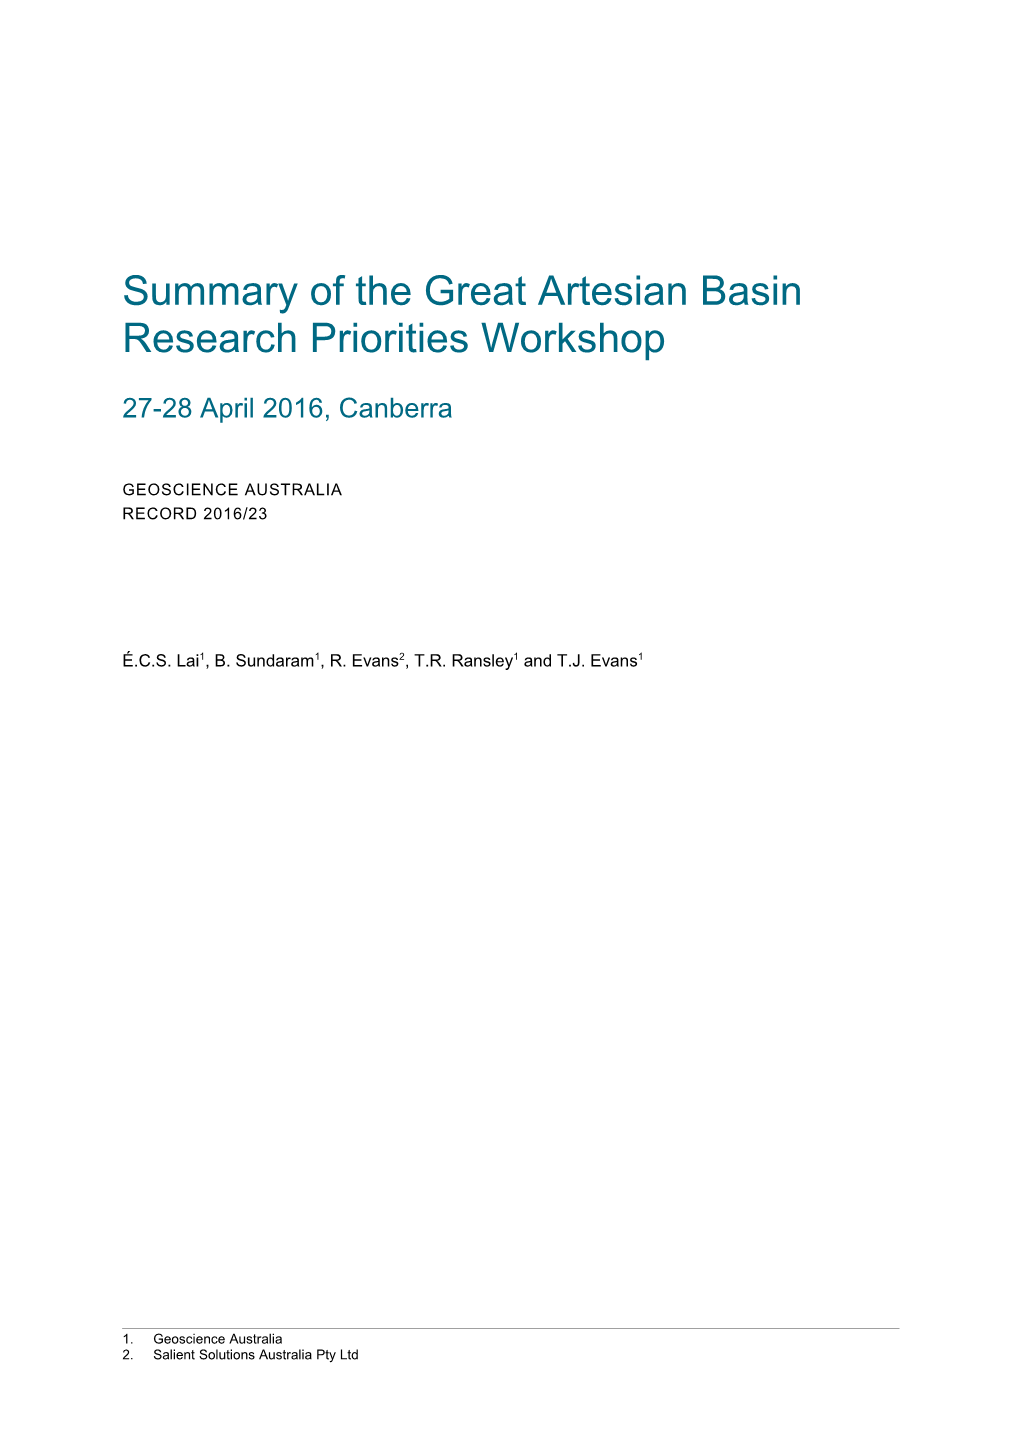 Summary of the Great Artesian Basin Research Priorities Workshop